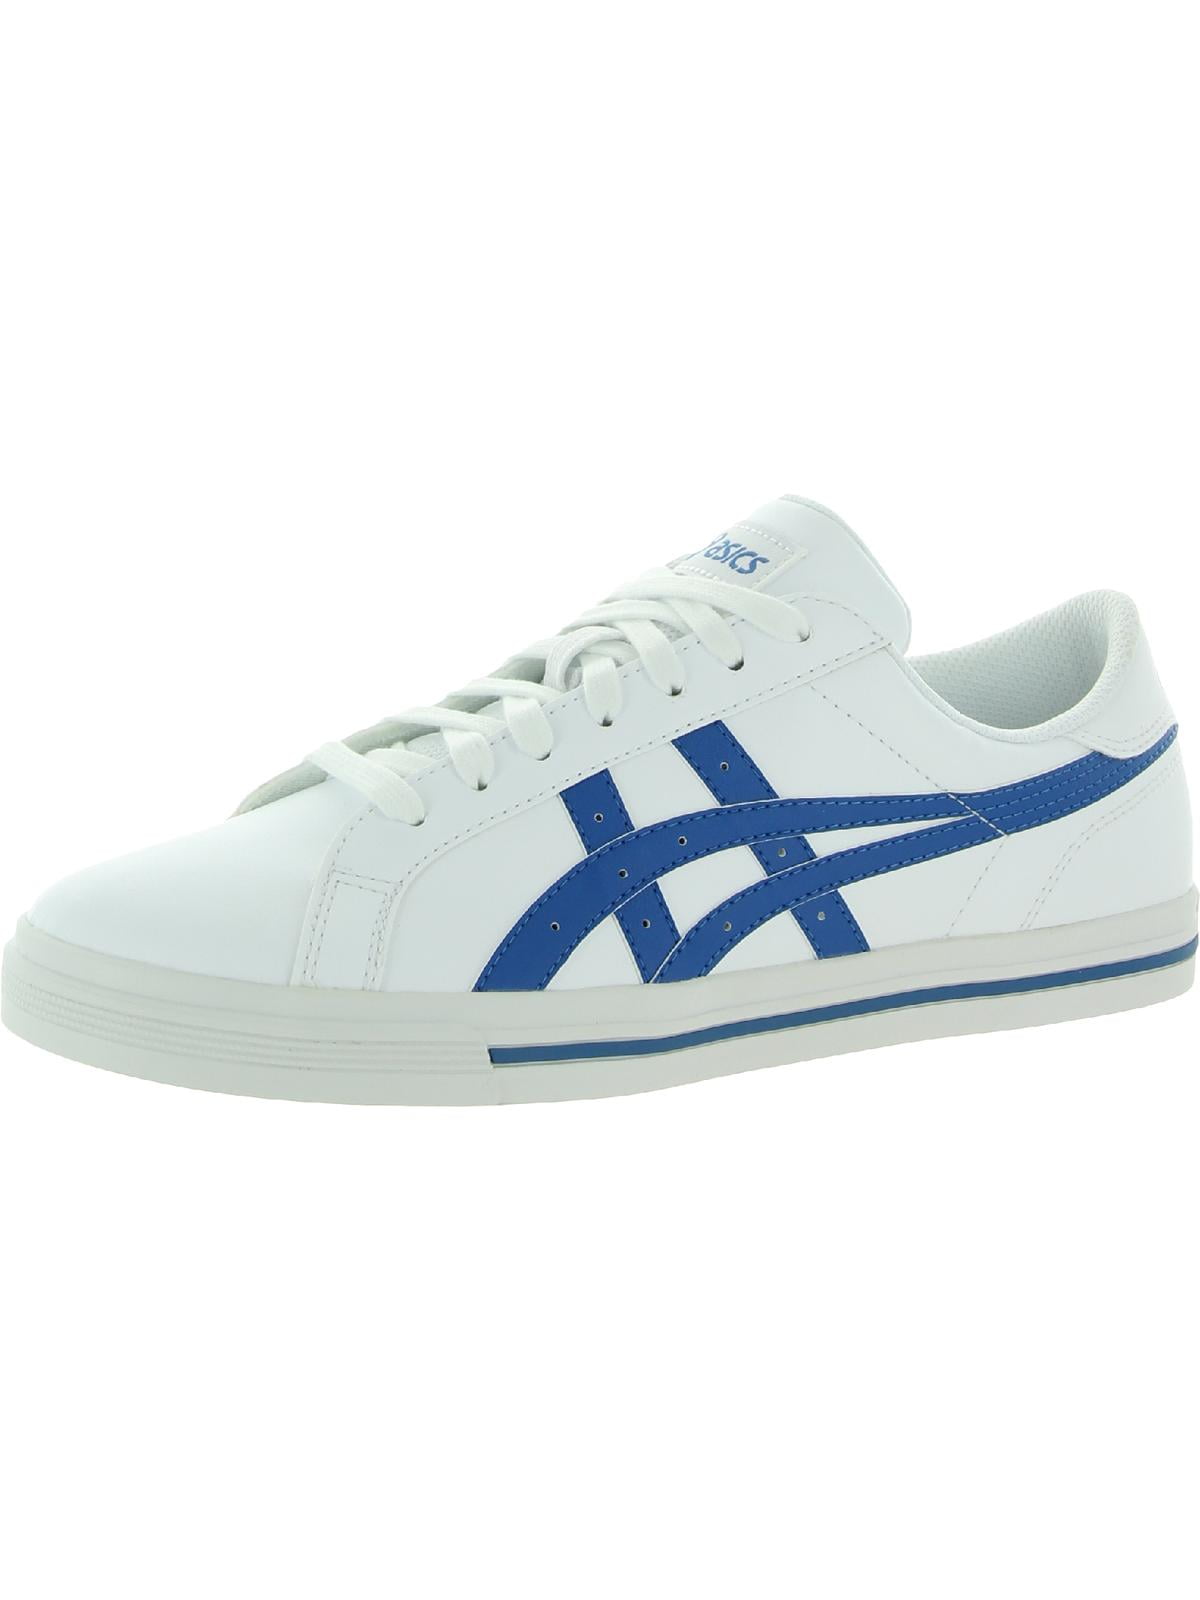 Asics Mens Classic Tempo Trainer Casual and Sneakers -